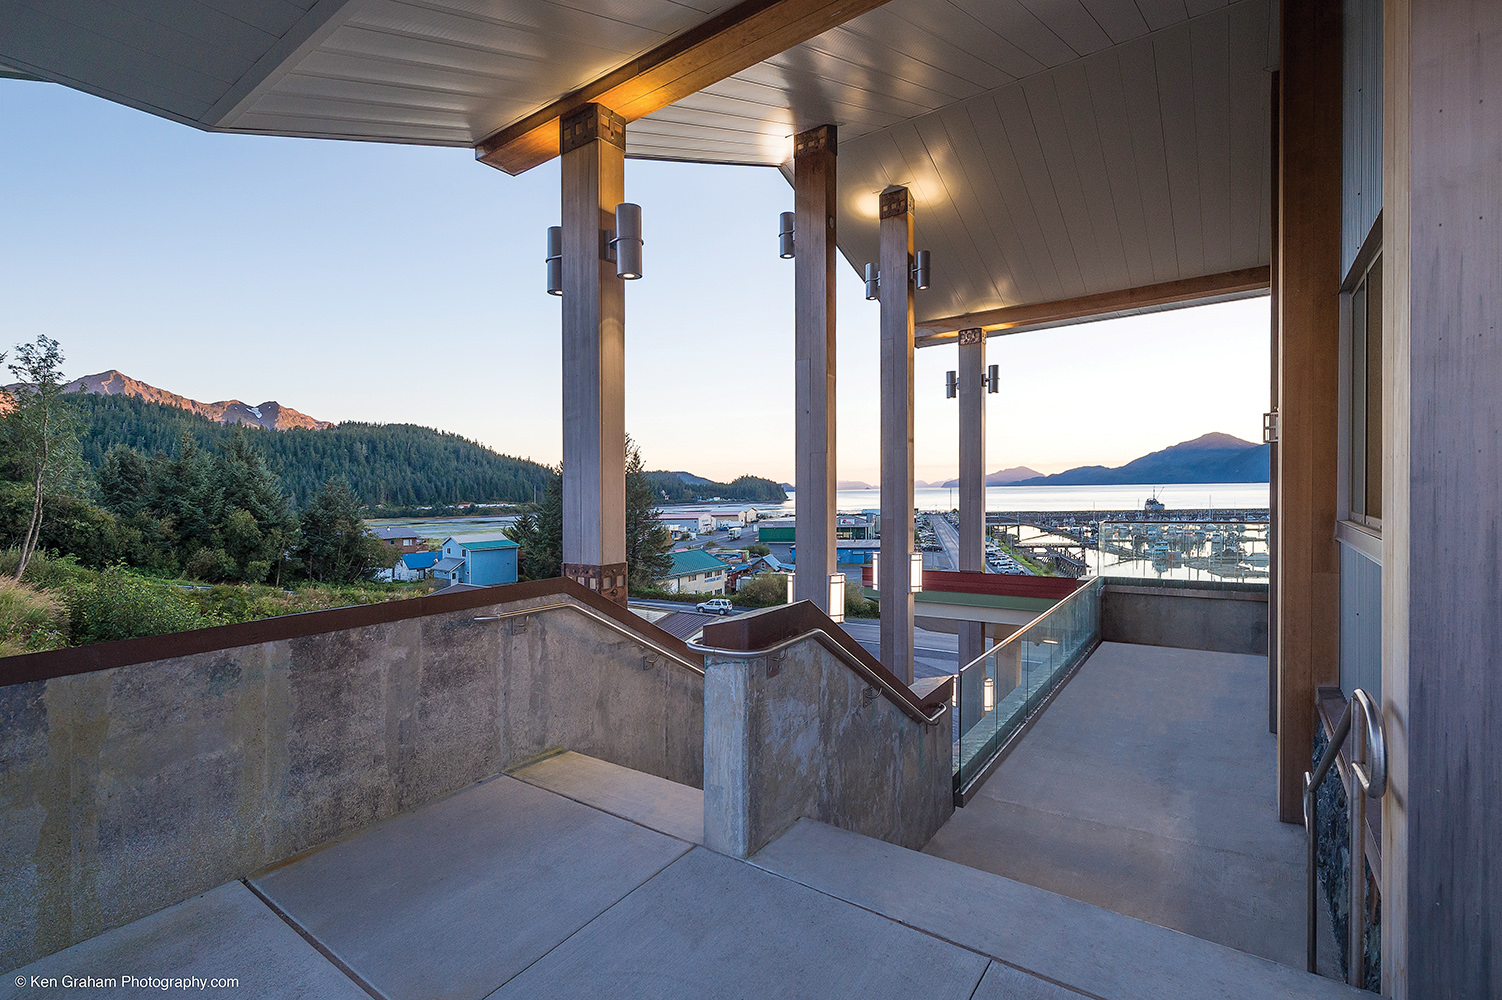 Colonnade and Scope outdoor lighting fixtures illuminate the support columns of a beautiful waterfront building.